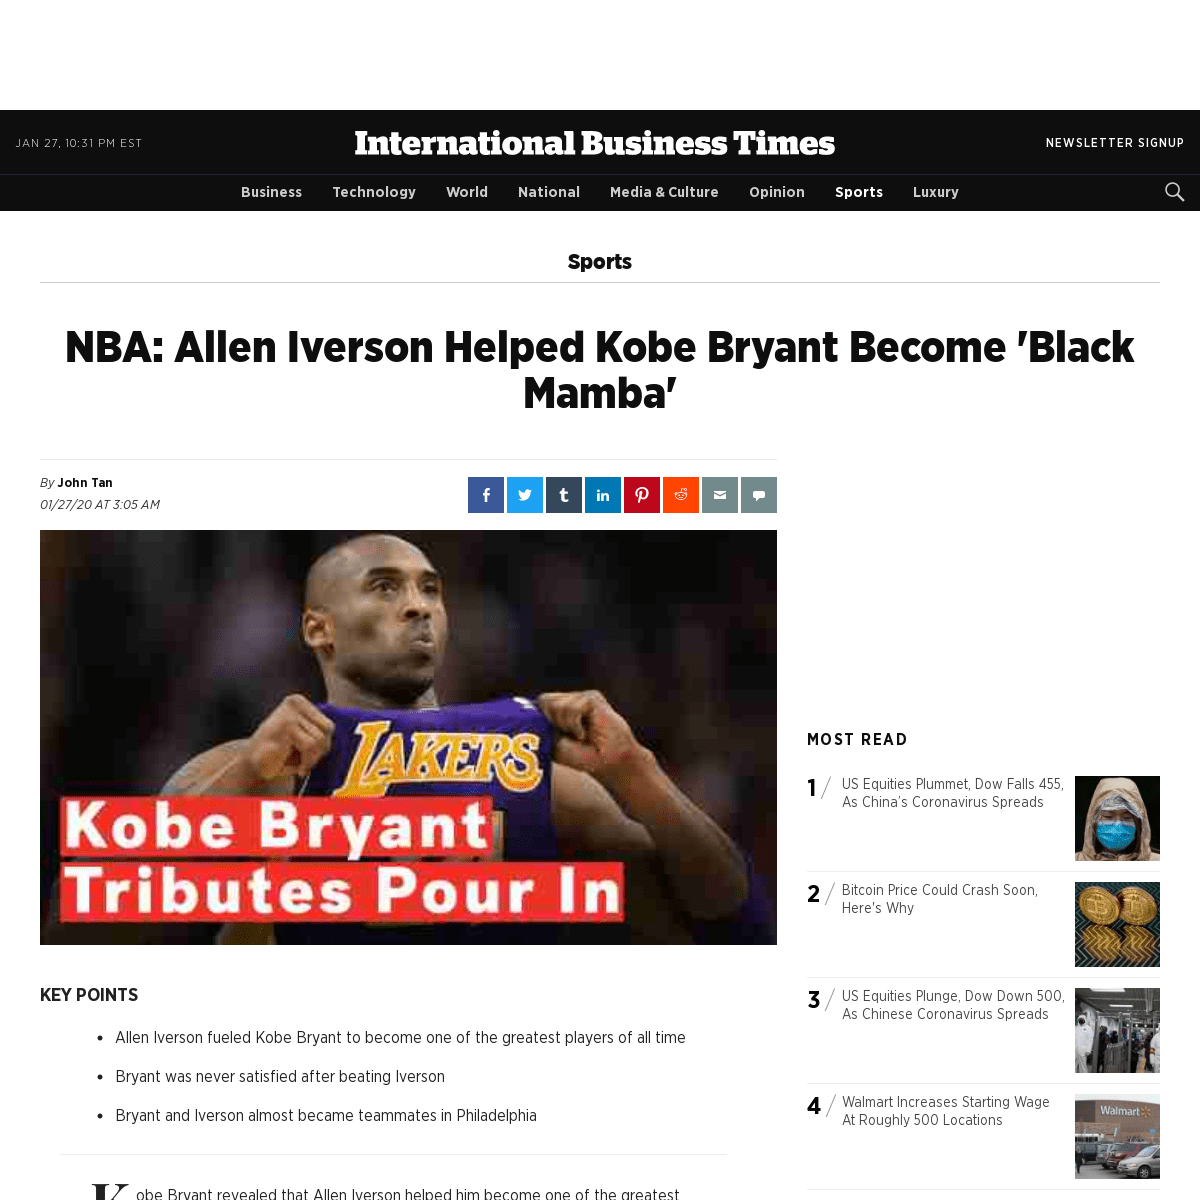 A complete backup of www.ibtimes.com/nba-allen-iverson-helped-kobe-bryant-become-black-mamba-2910129